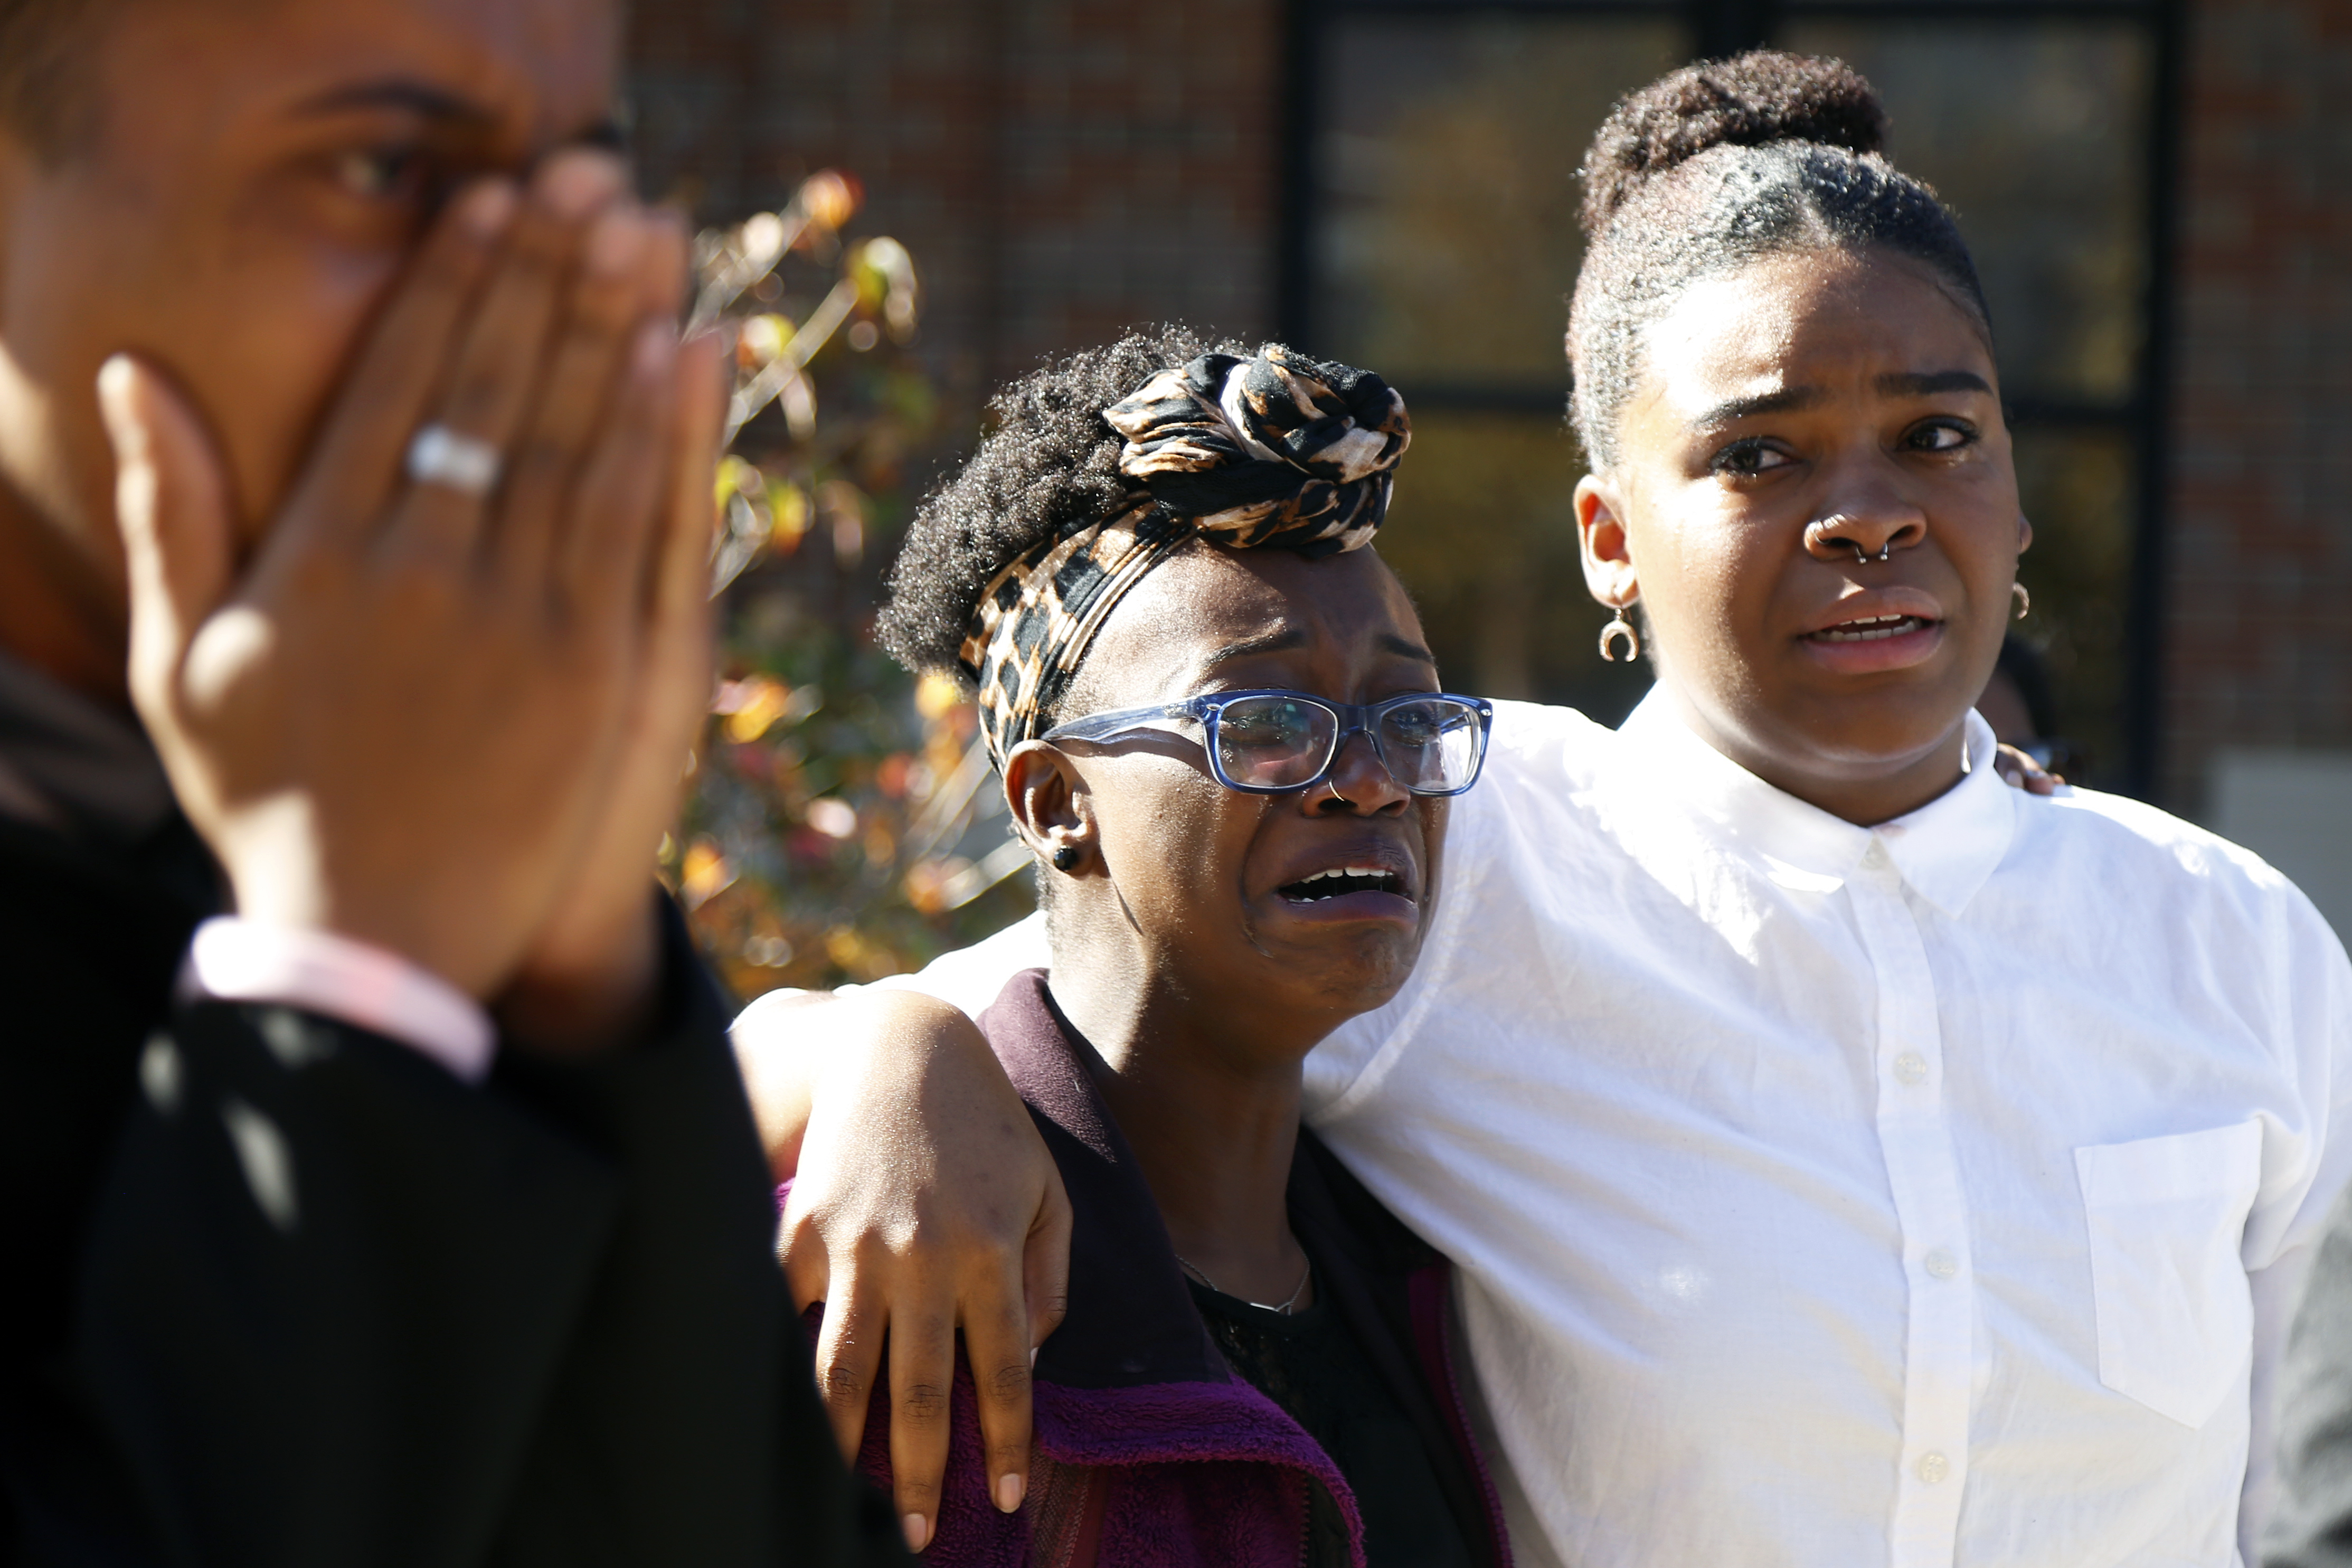 Students become emotional during Concerned Student 1950 protests that included a presentation of their stories of racism on campus on Oct. 7, 2015.